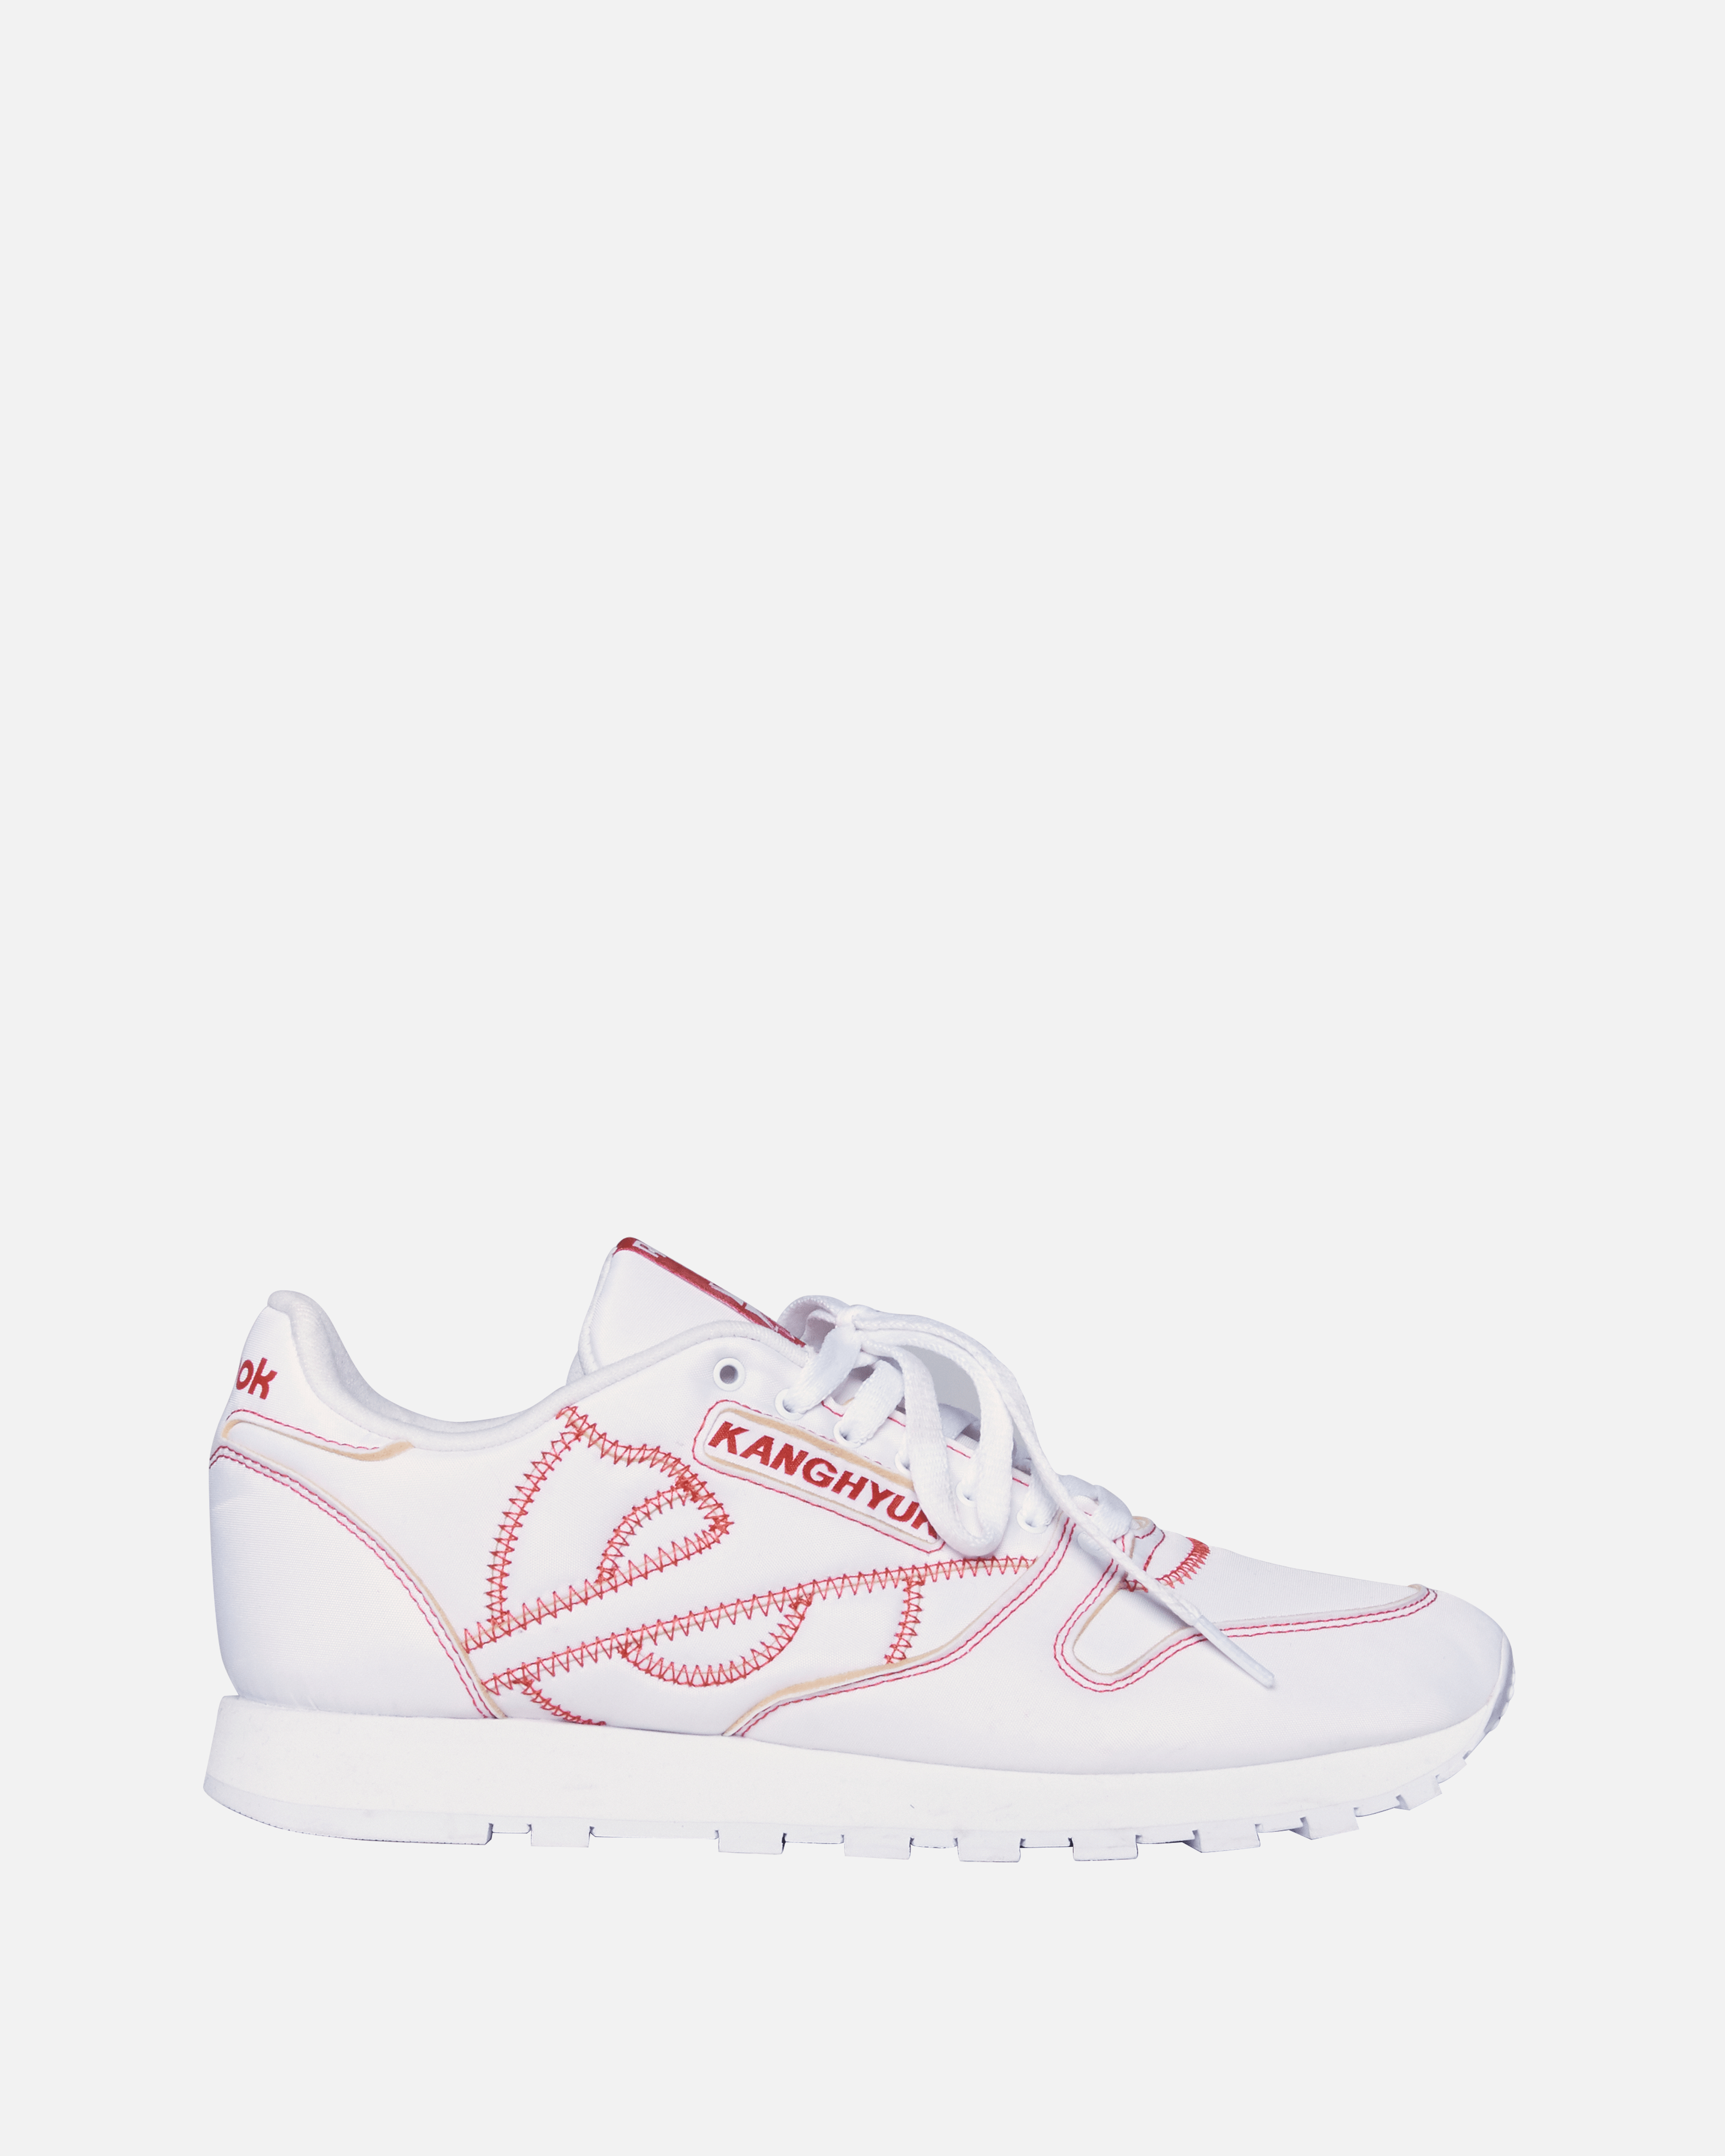 Reebok Classic Leather White/Red – SVRN